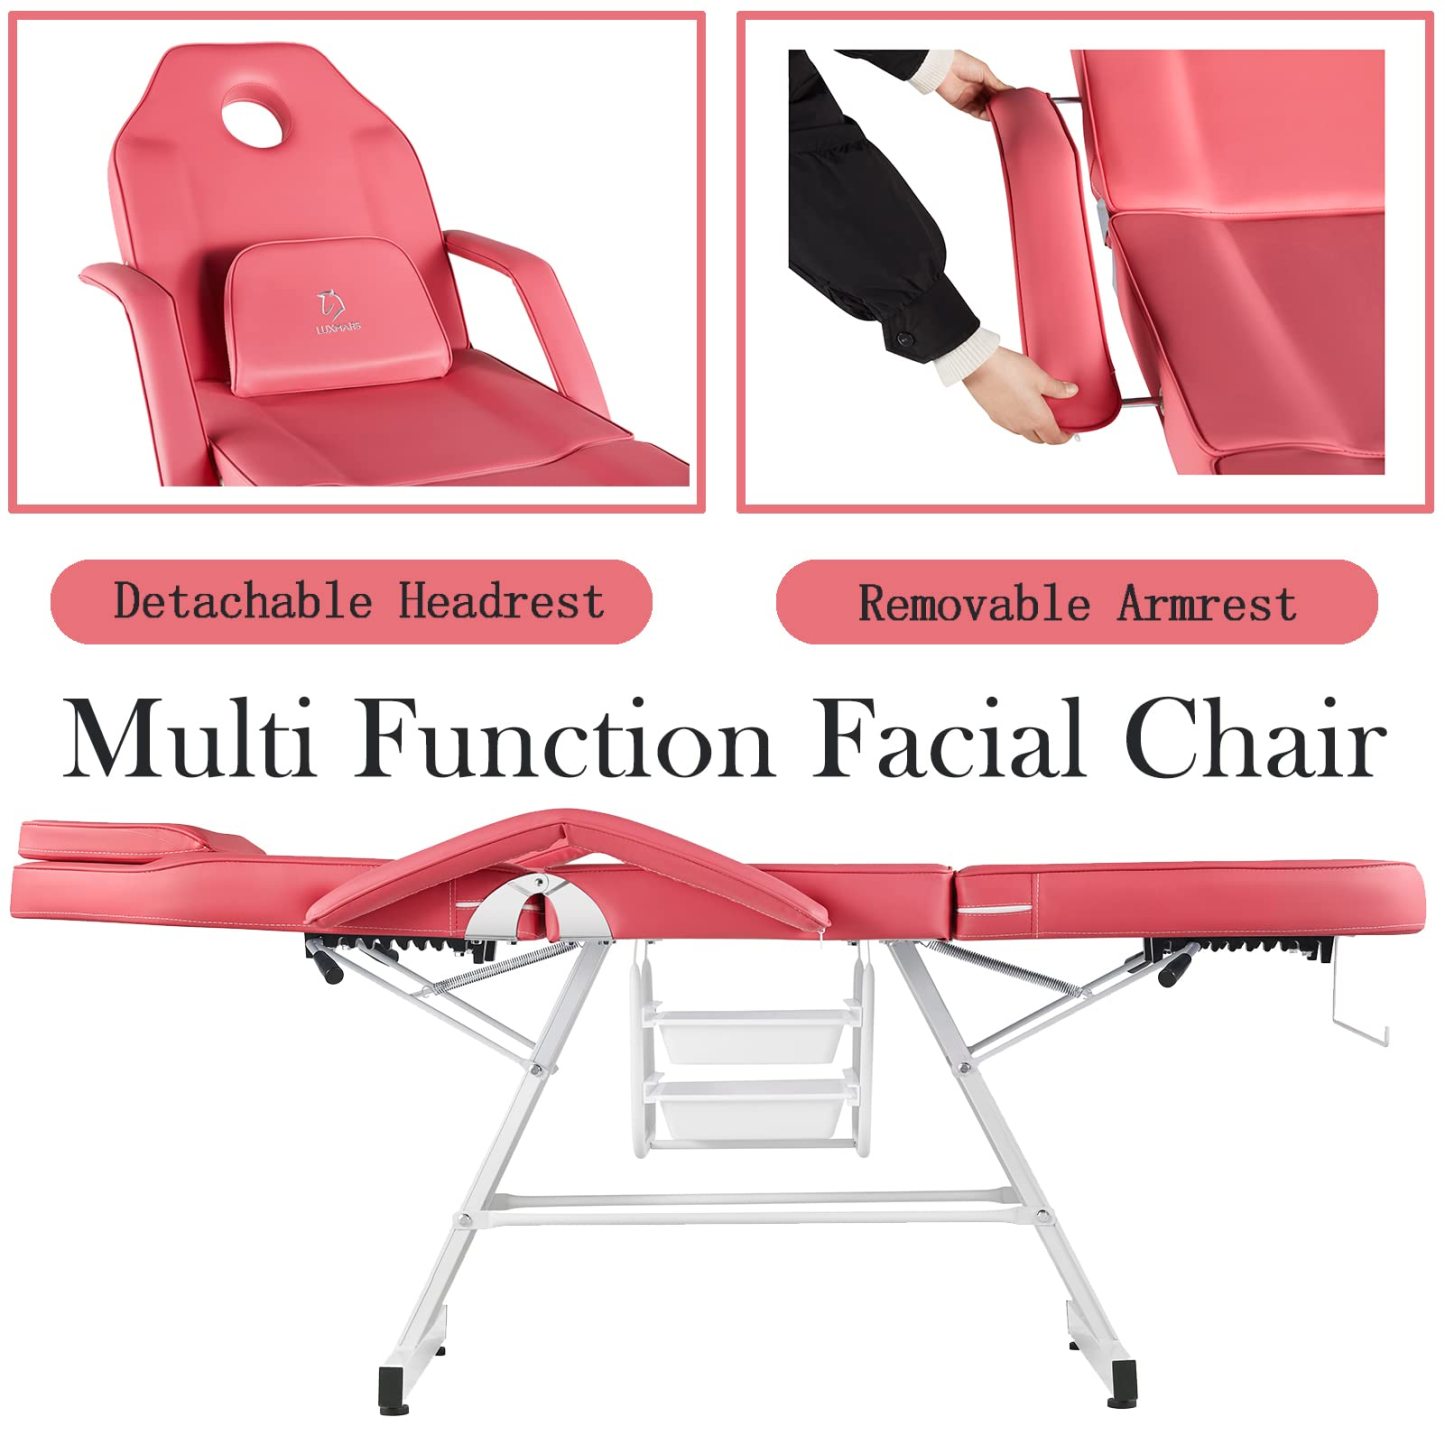 LUXMARS Facial Chair, Tattoo/Salon Bed with Hydraulic Stool for Professional Massage Facial Lash Beauty Treatment Spa